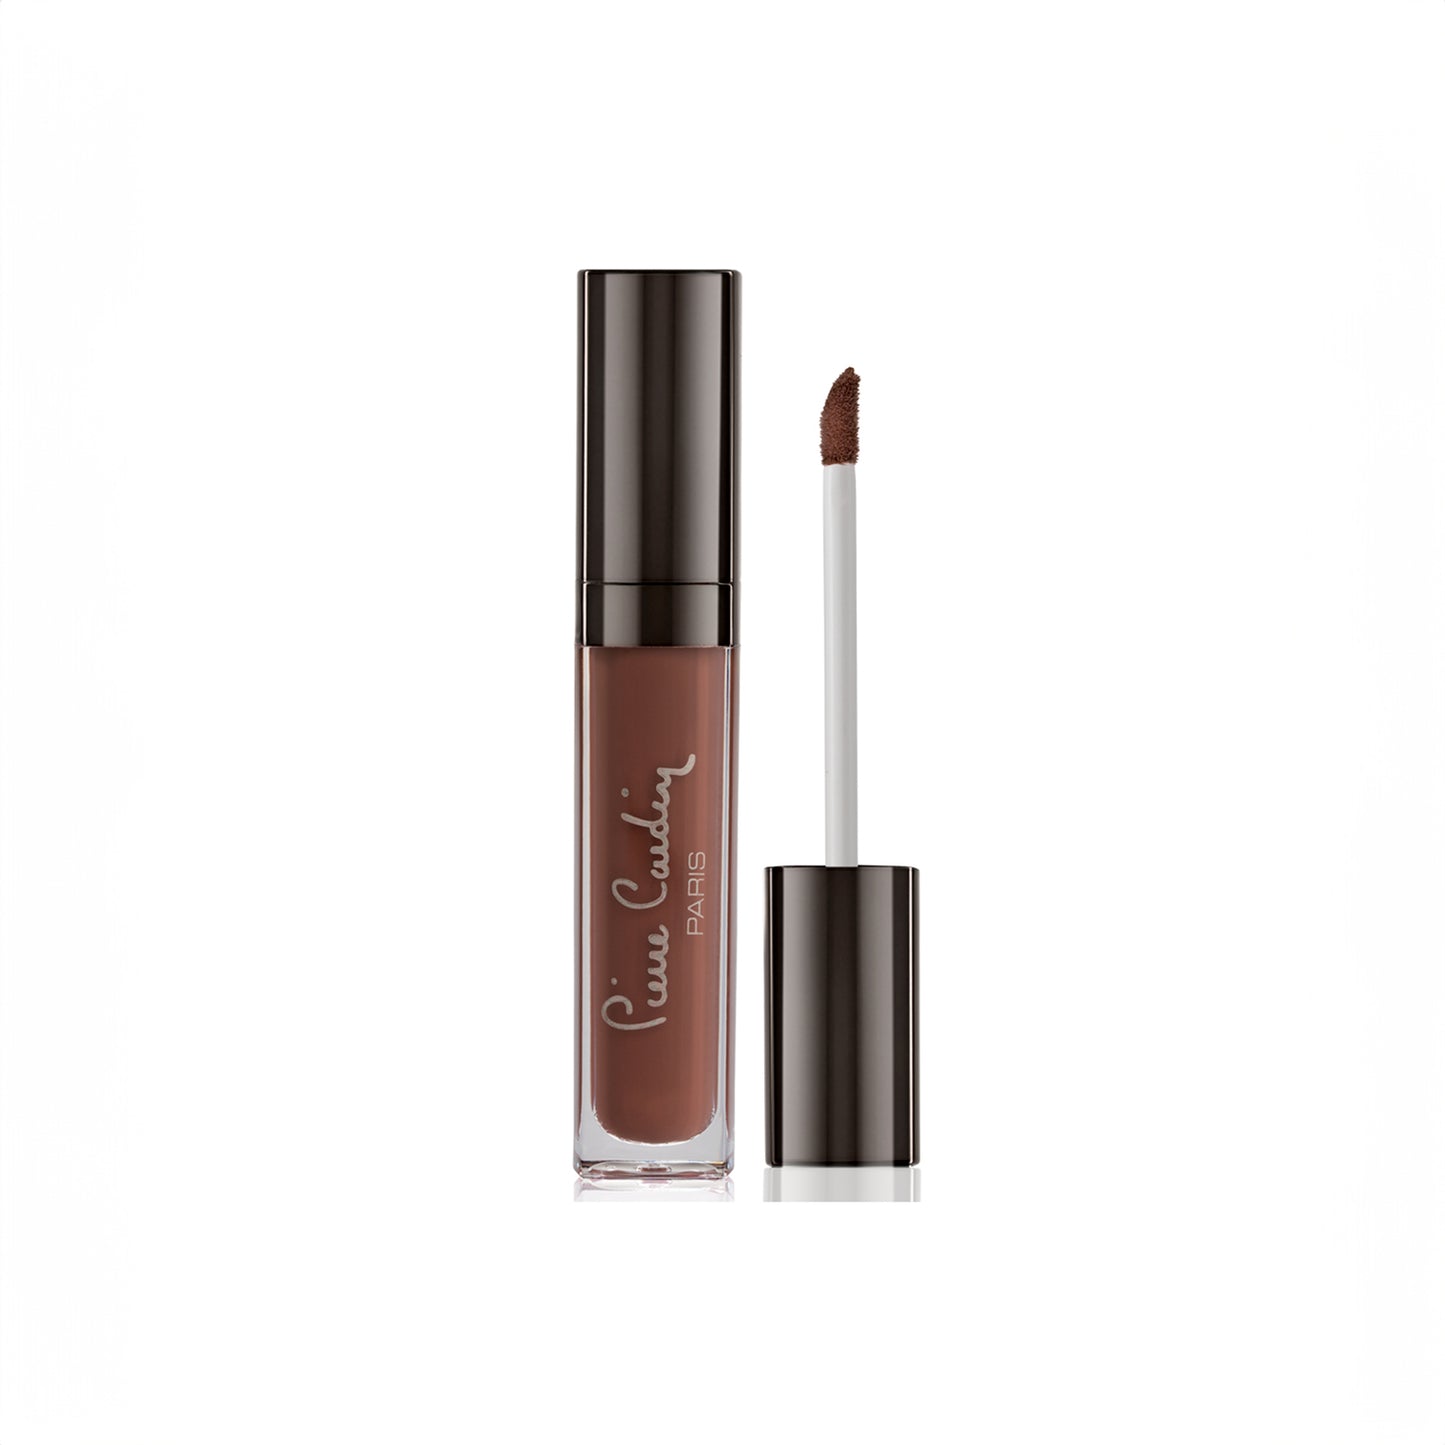 Pierre Cardin Photoflash Lipgloss - Édition Glow Color Toffee Nut 145 - 9 ml